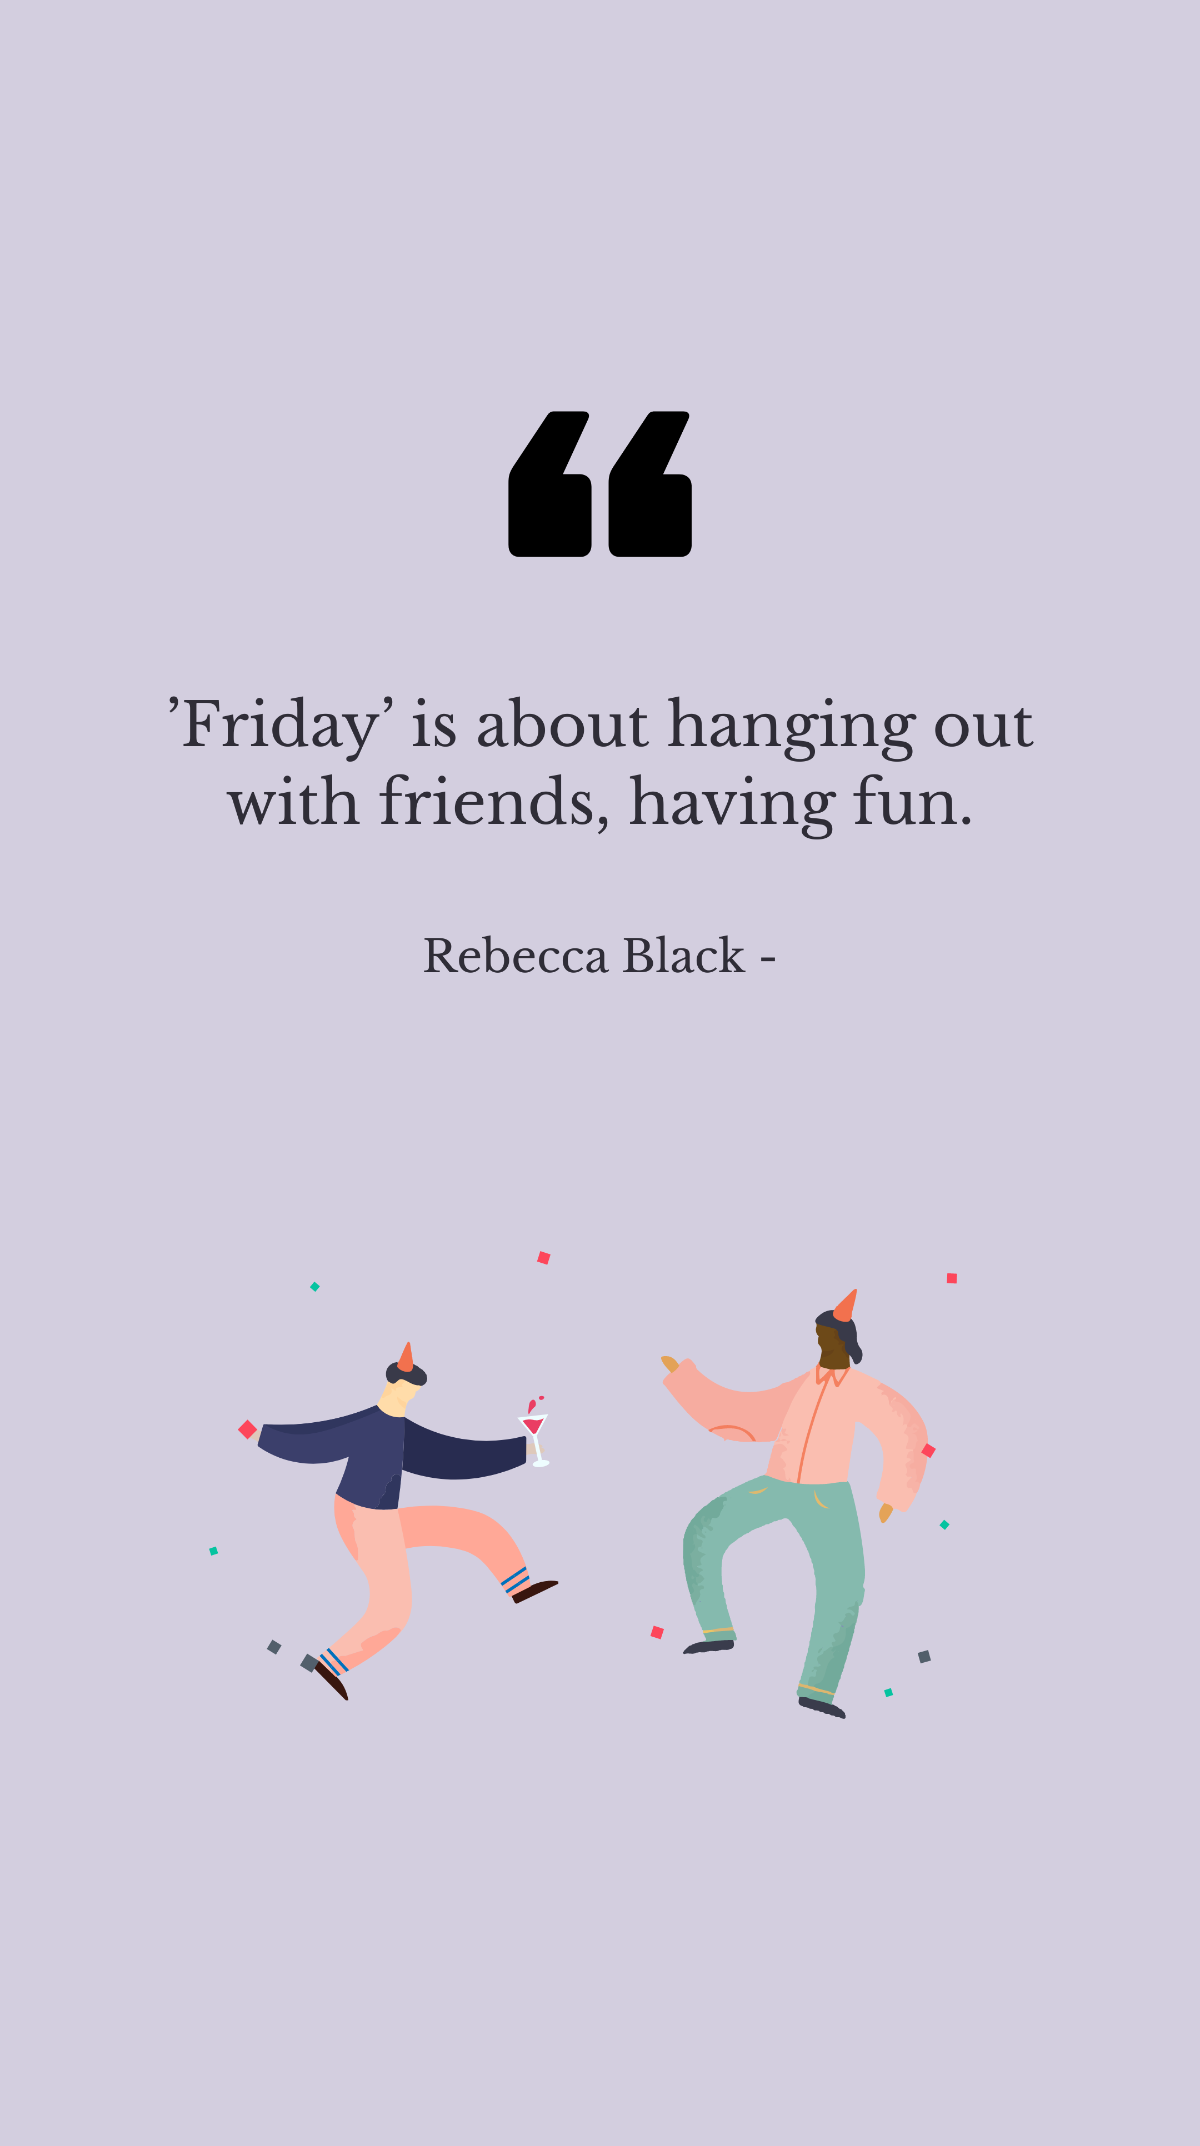 Rebecca Black - ’Friday’ is about hanging out with friends, having fun. Template